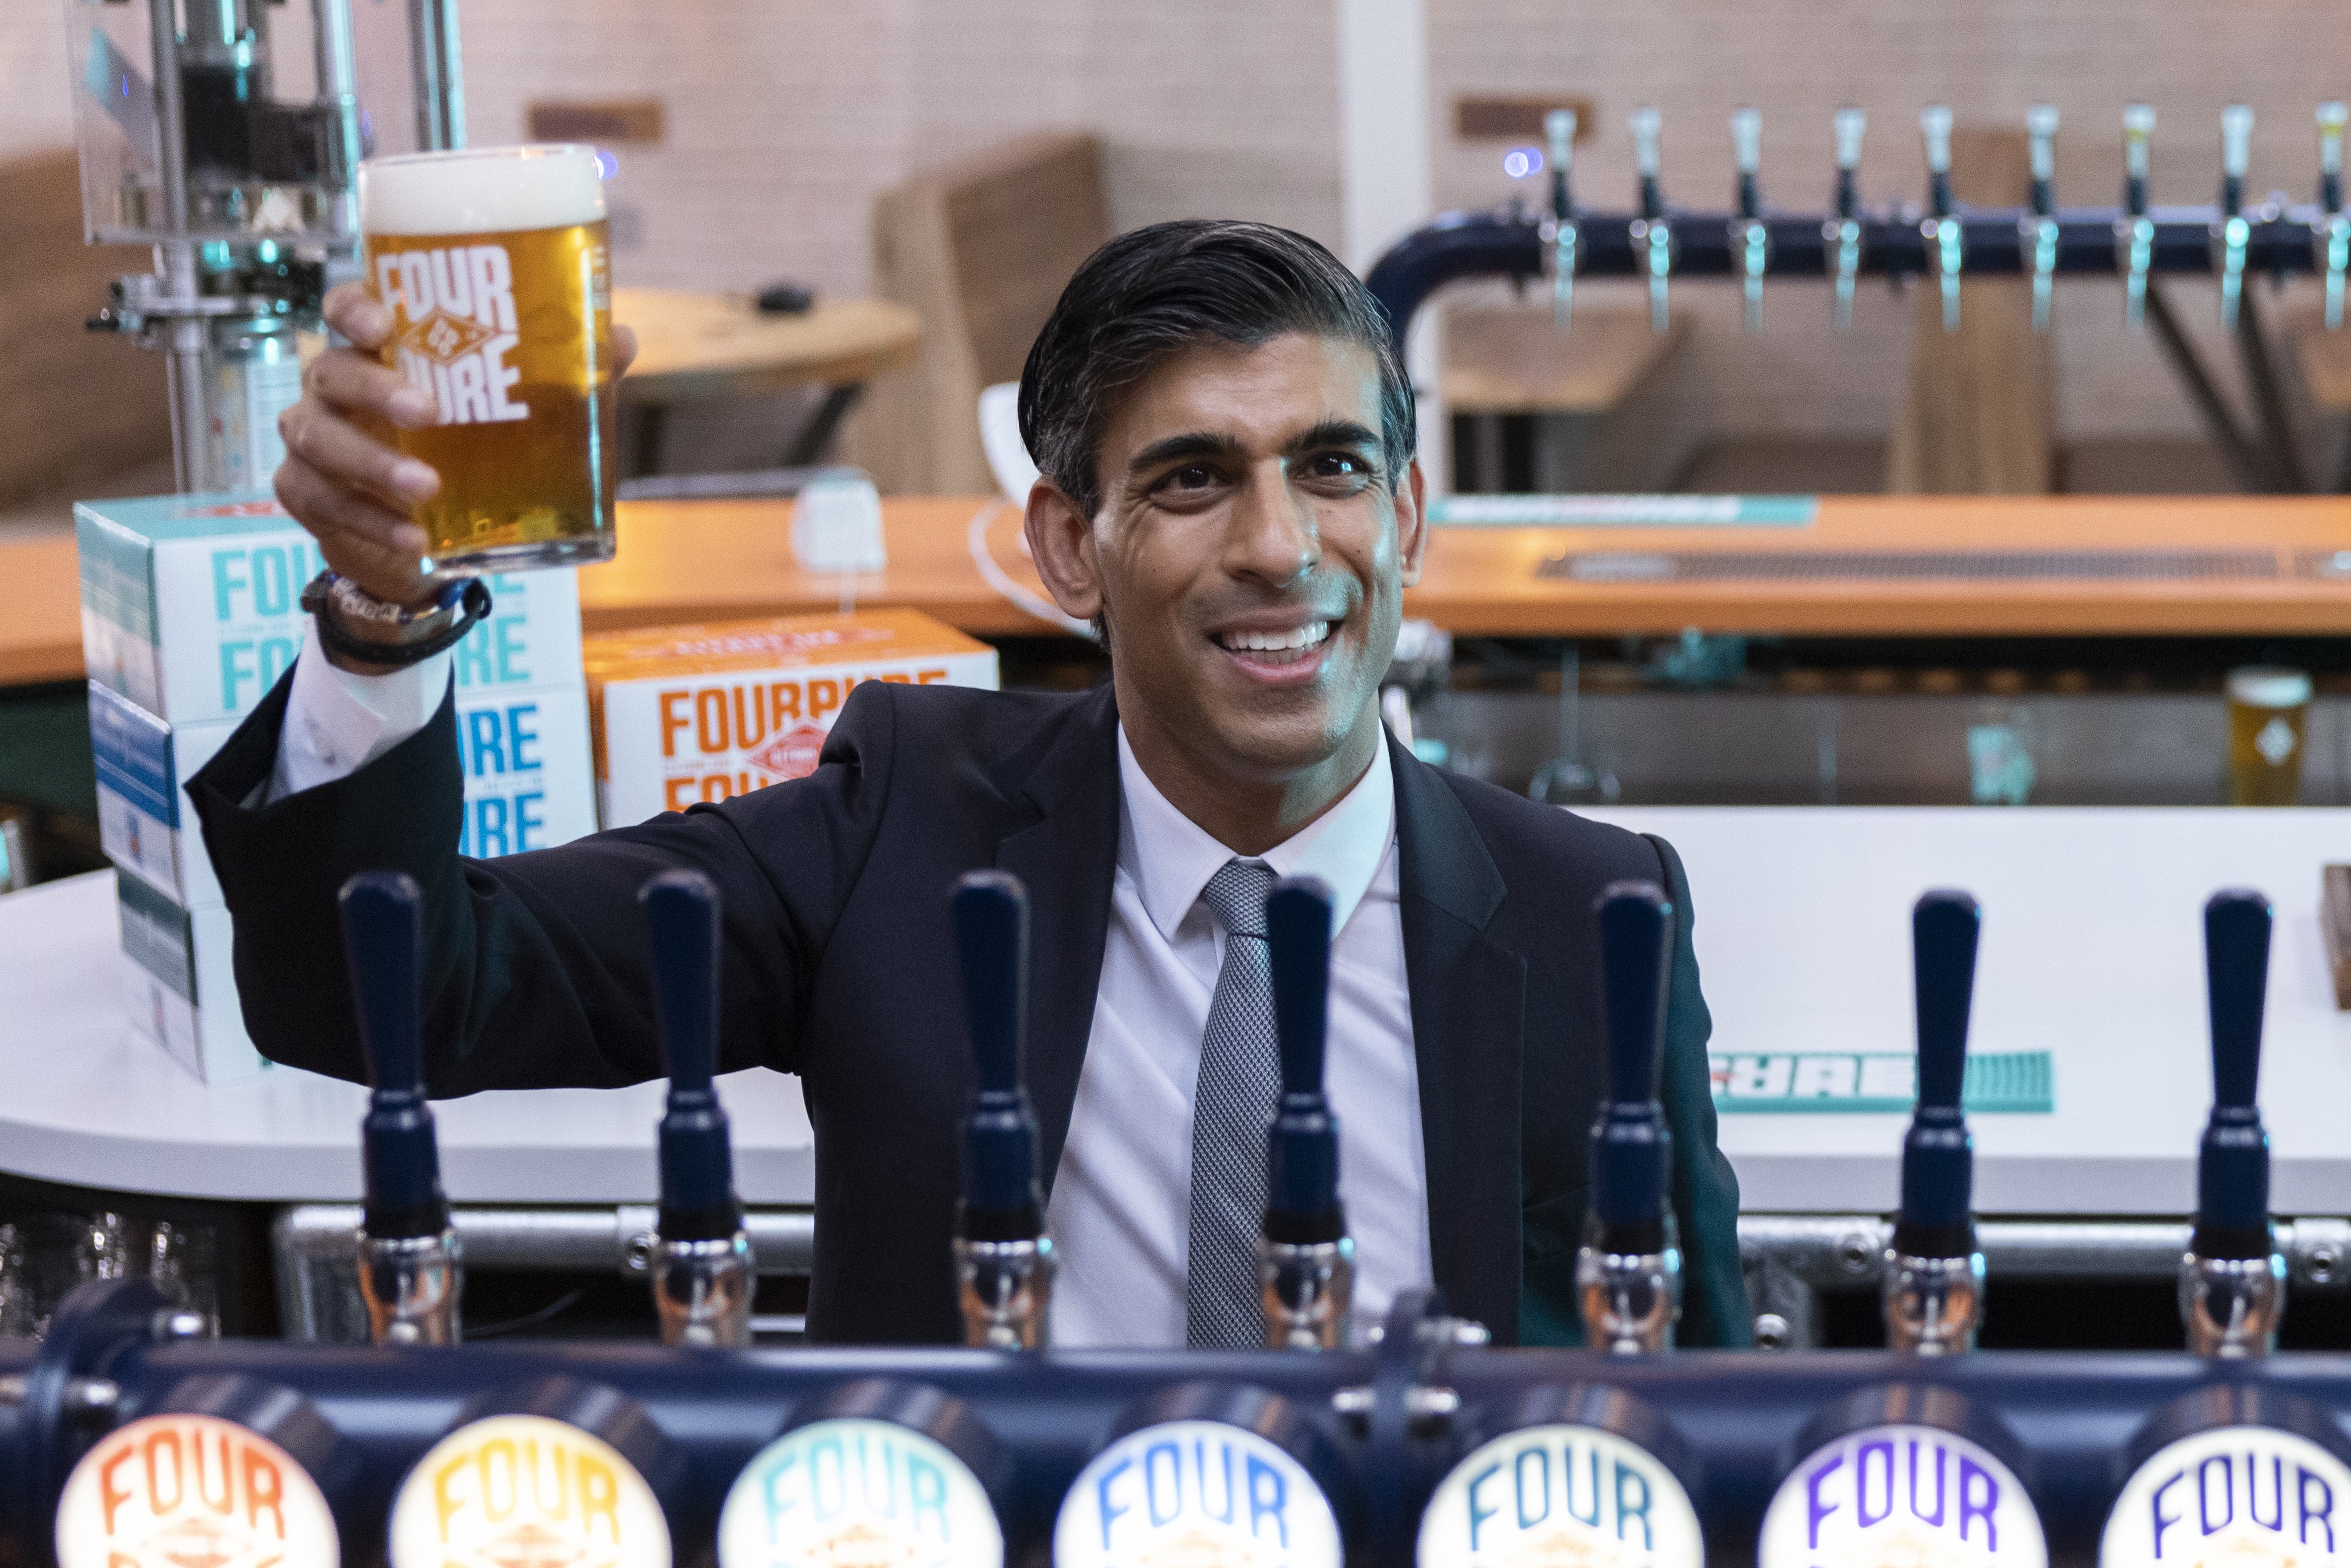 Chancellor of the Exchequer Rishi Sunak during a visit to Fourpure Brewery in Bermondsey, London, after he delivered his Budget (PA)